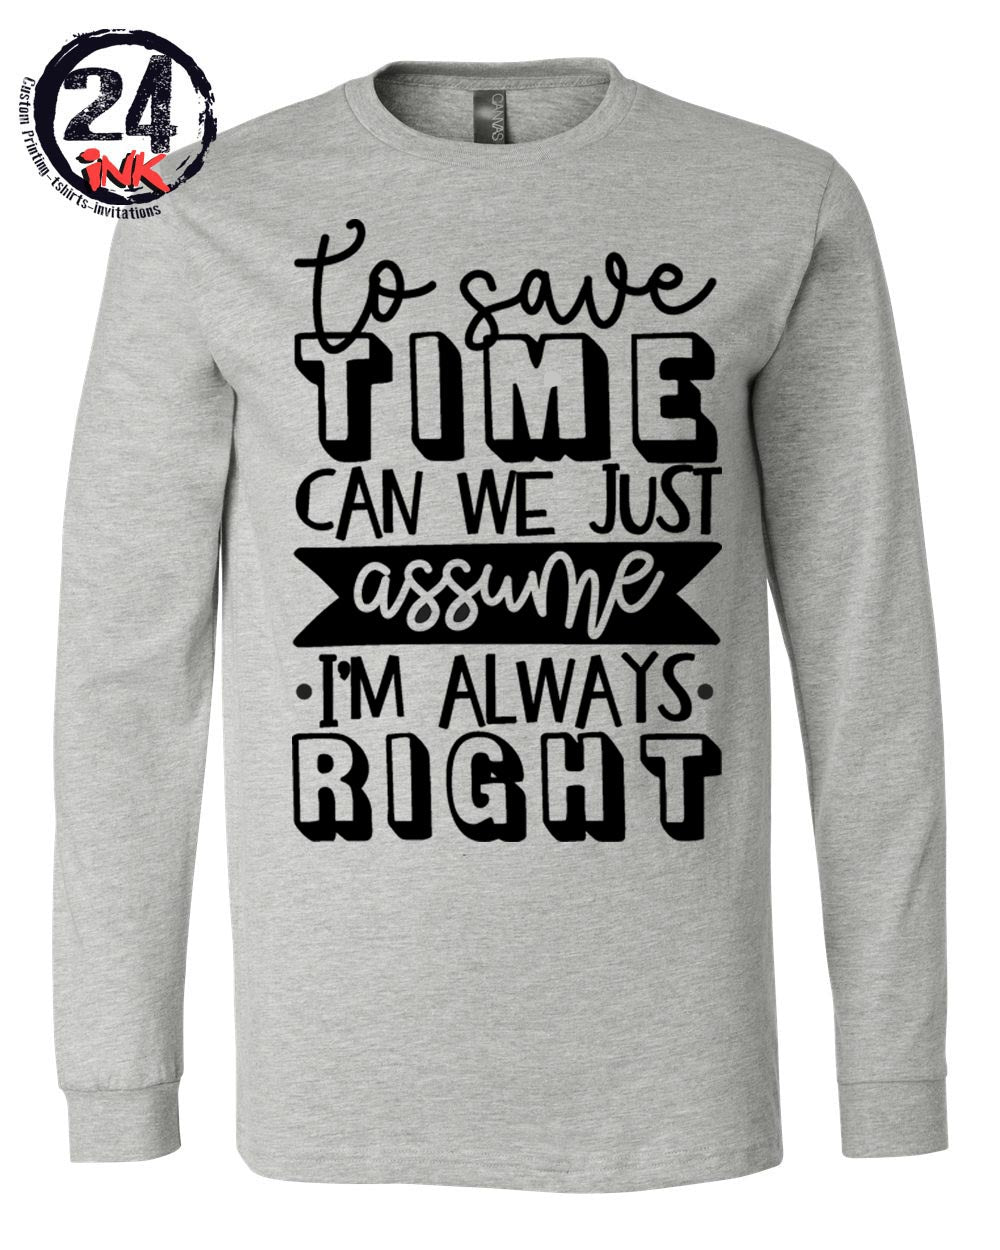 Let's assume I'm always right Shirt